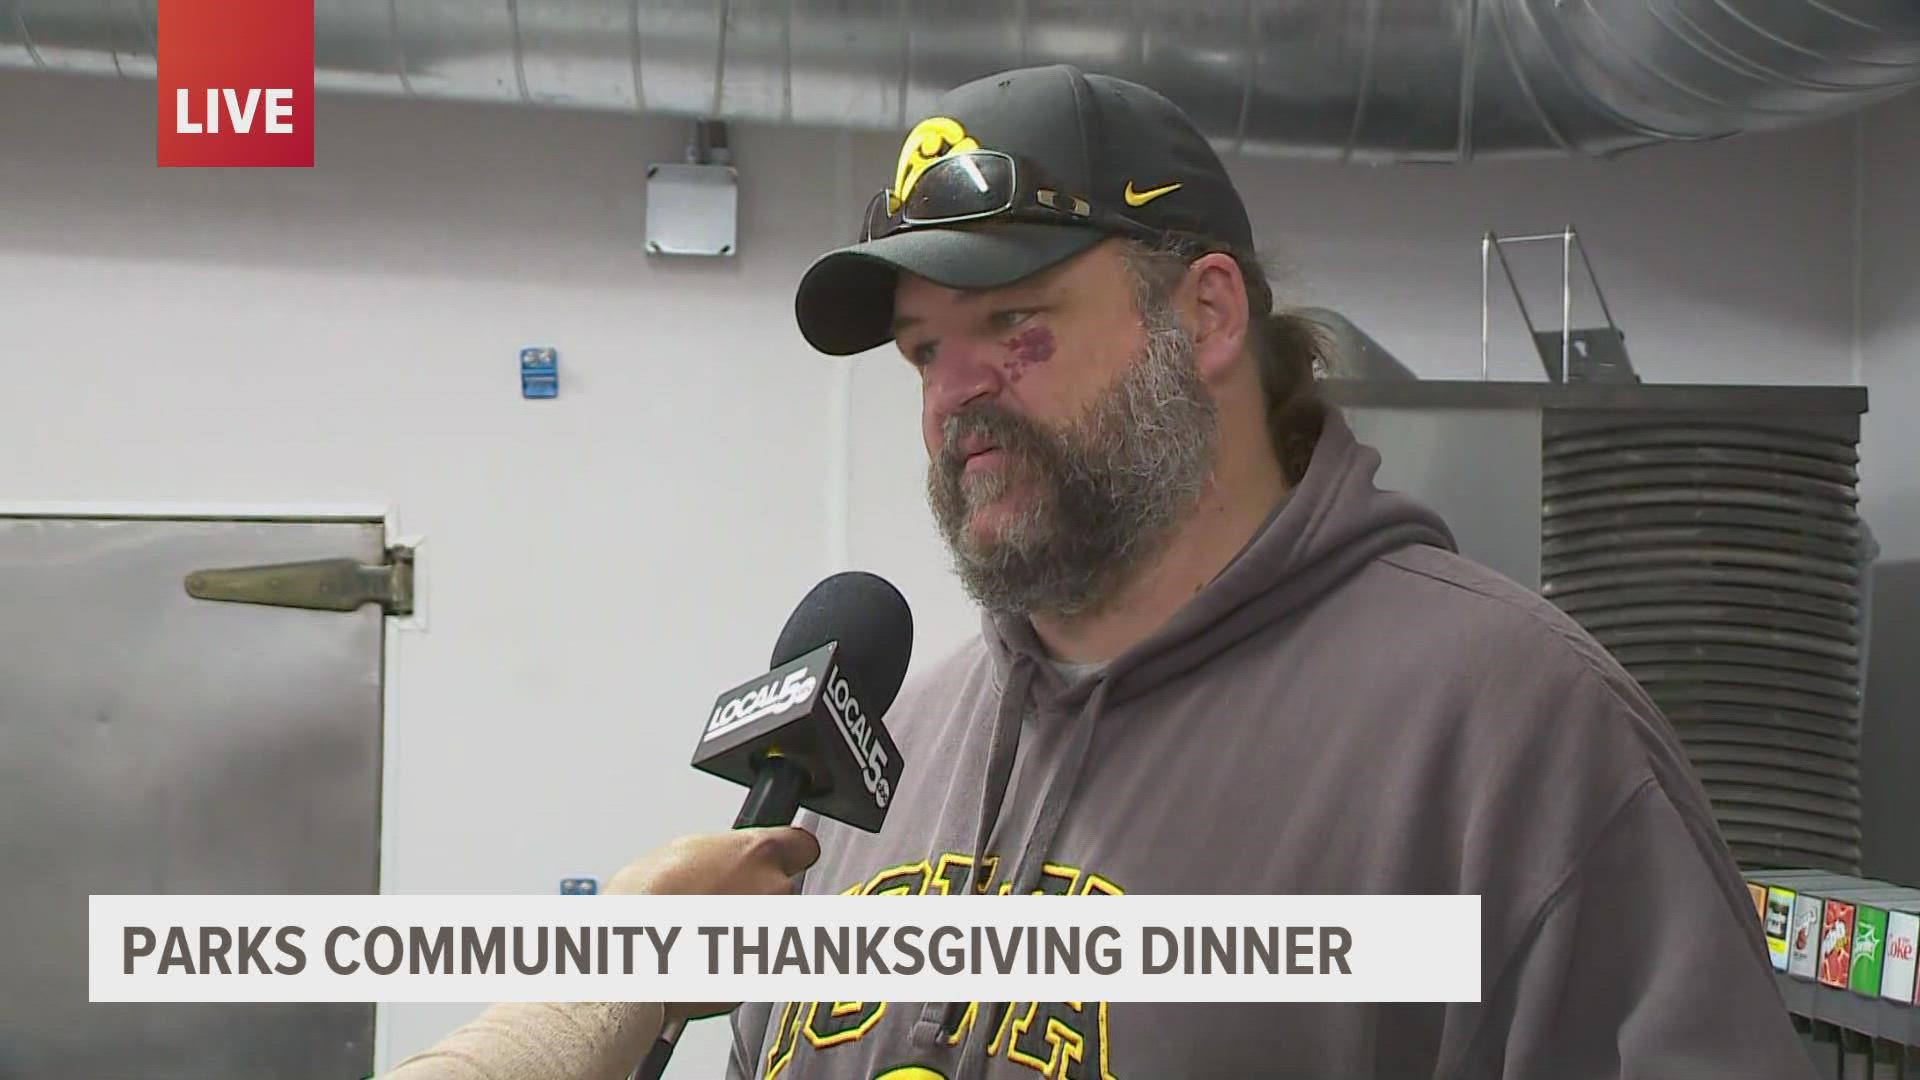 Secretary for the Parks Community Thanksgiving Dinner committee shared how meals will be distributed, and the preparation it takes to put the dinner together.